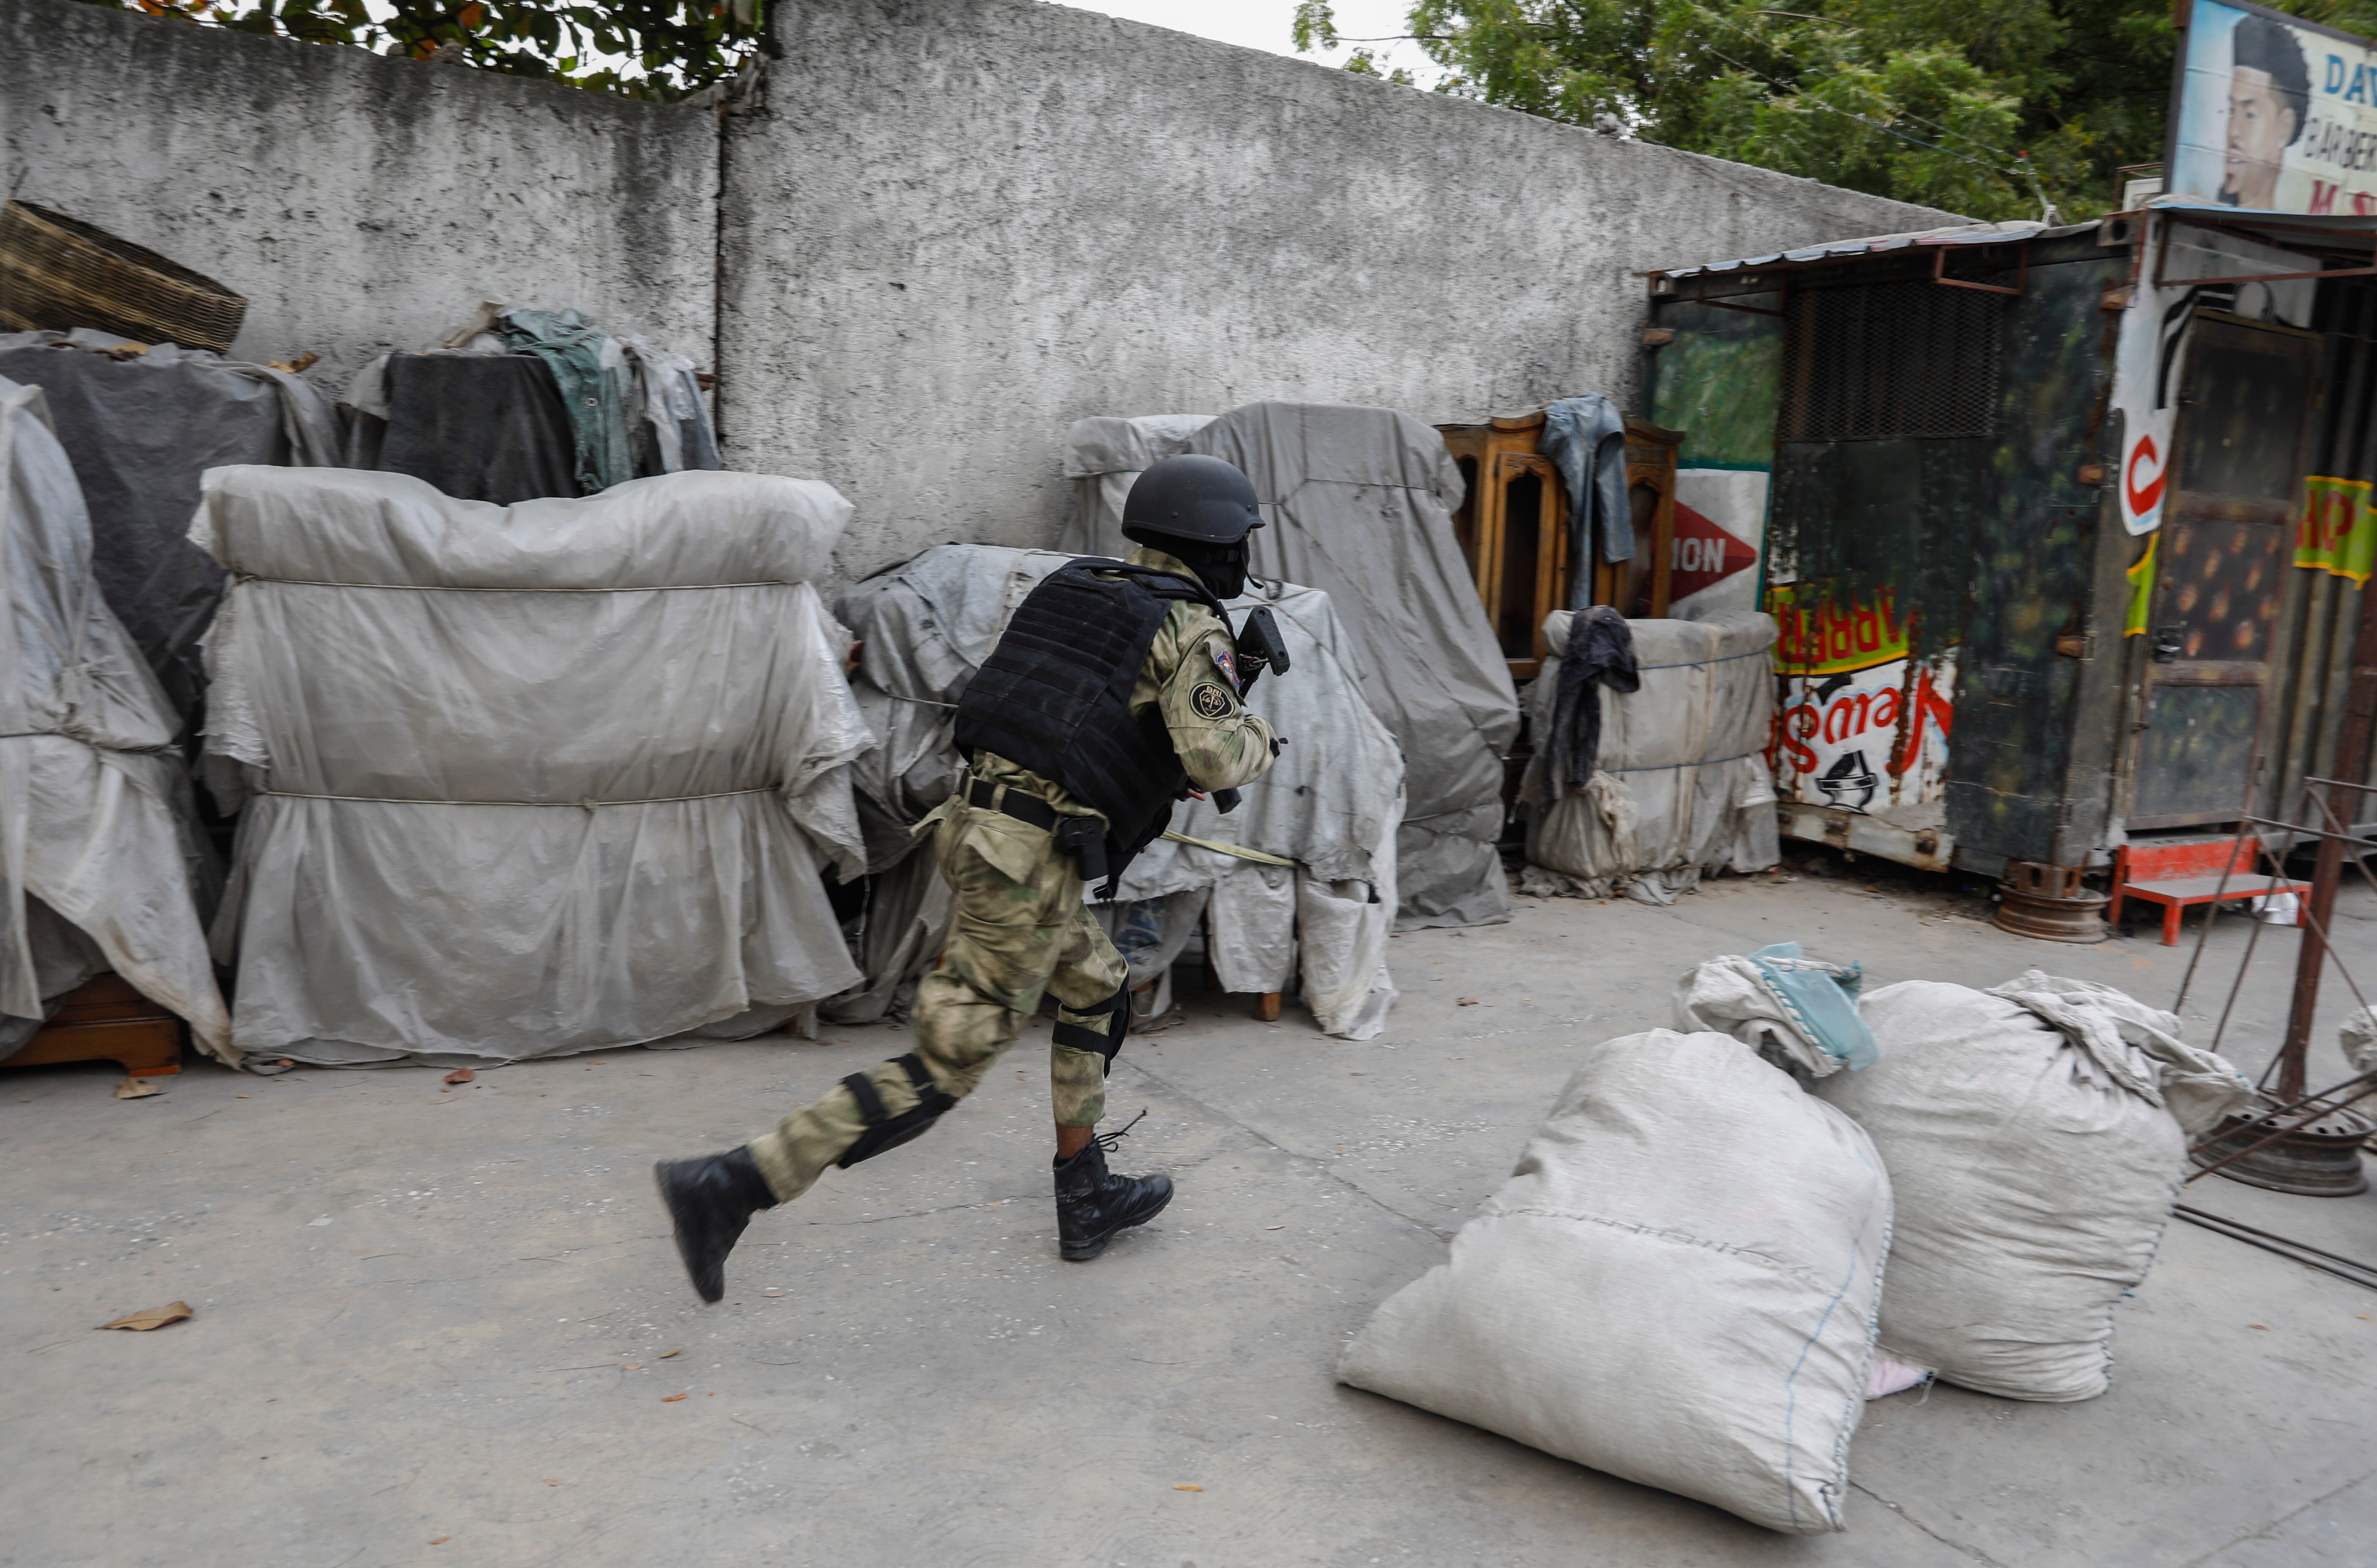 A police officer runs during an anti-gang operation at the Portail neighborhood of Port-au-Prince, Haiti